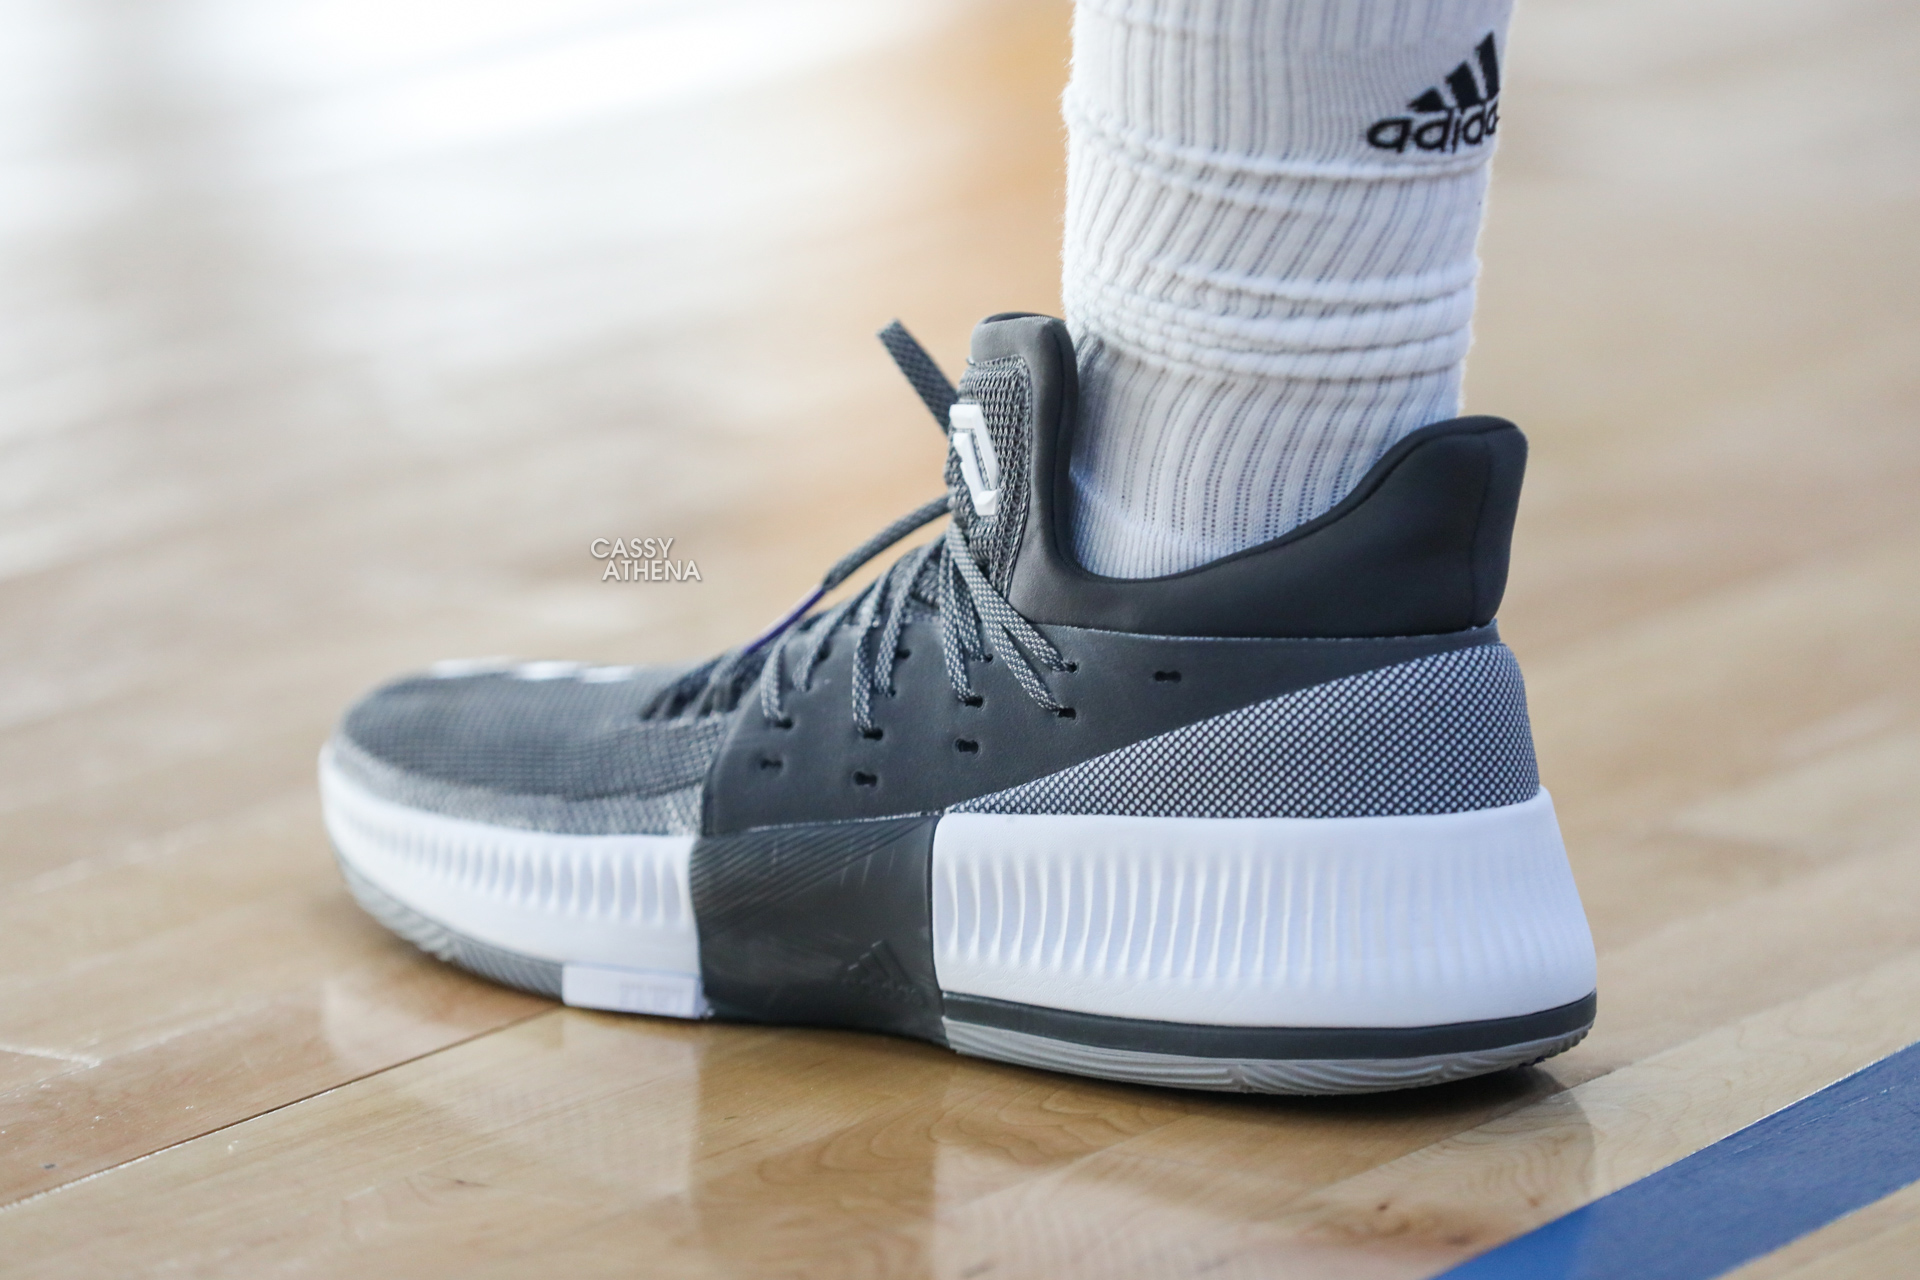 adidas Dame 3 "Wasatch Front"